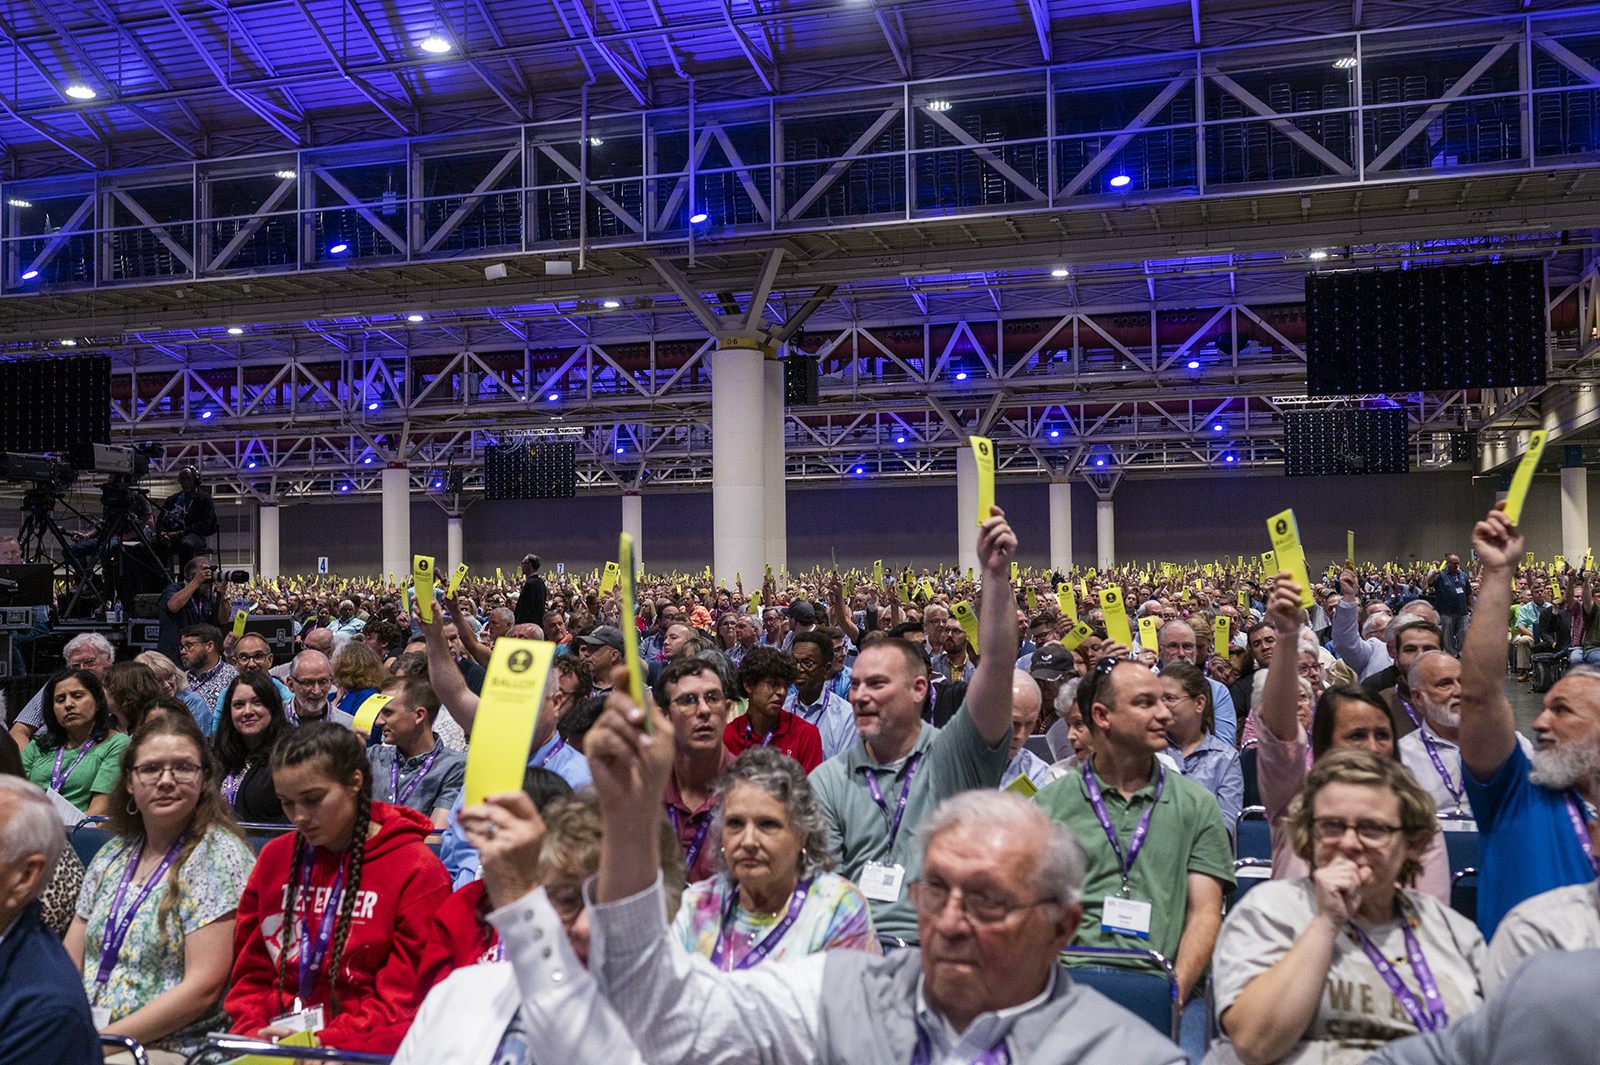 Messengers vote during the first day of the Southern Baptist Convention annual meeting at the Ernest N. Morial Convention Center in New Orleans, La., on June 13, 2023. RNS photo by Emily Kask